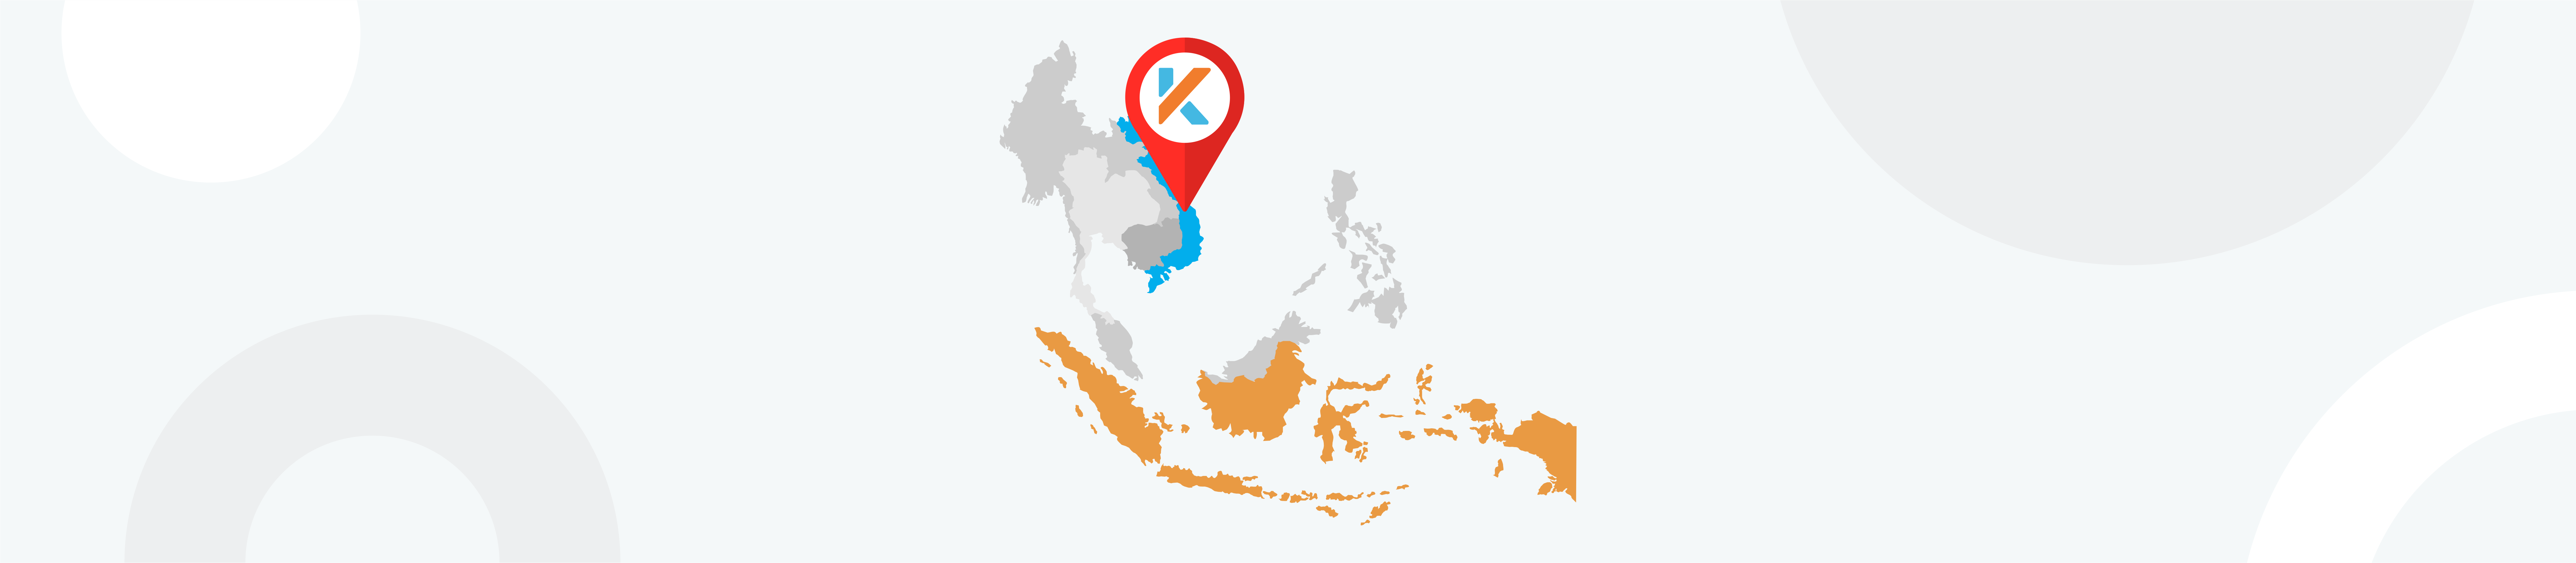 Kredivo Announces the Launch of Its Vietnam Operations as Part of the Business’ Ambition to Build Southeast Asia’s Leading BNPL